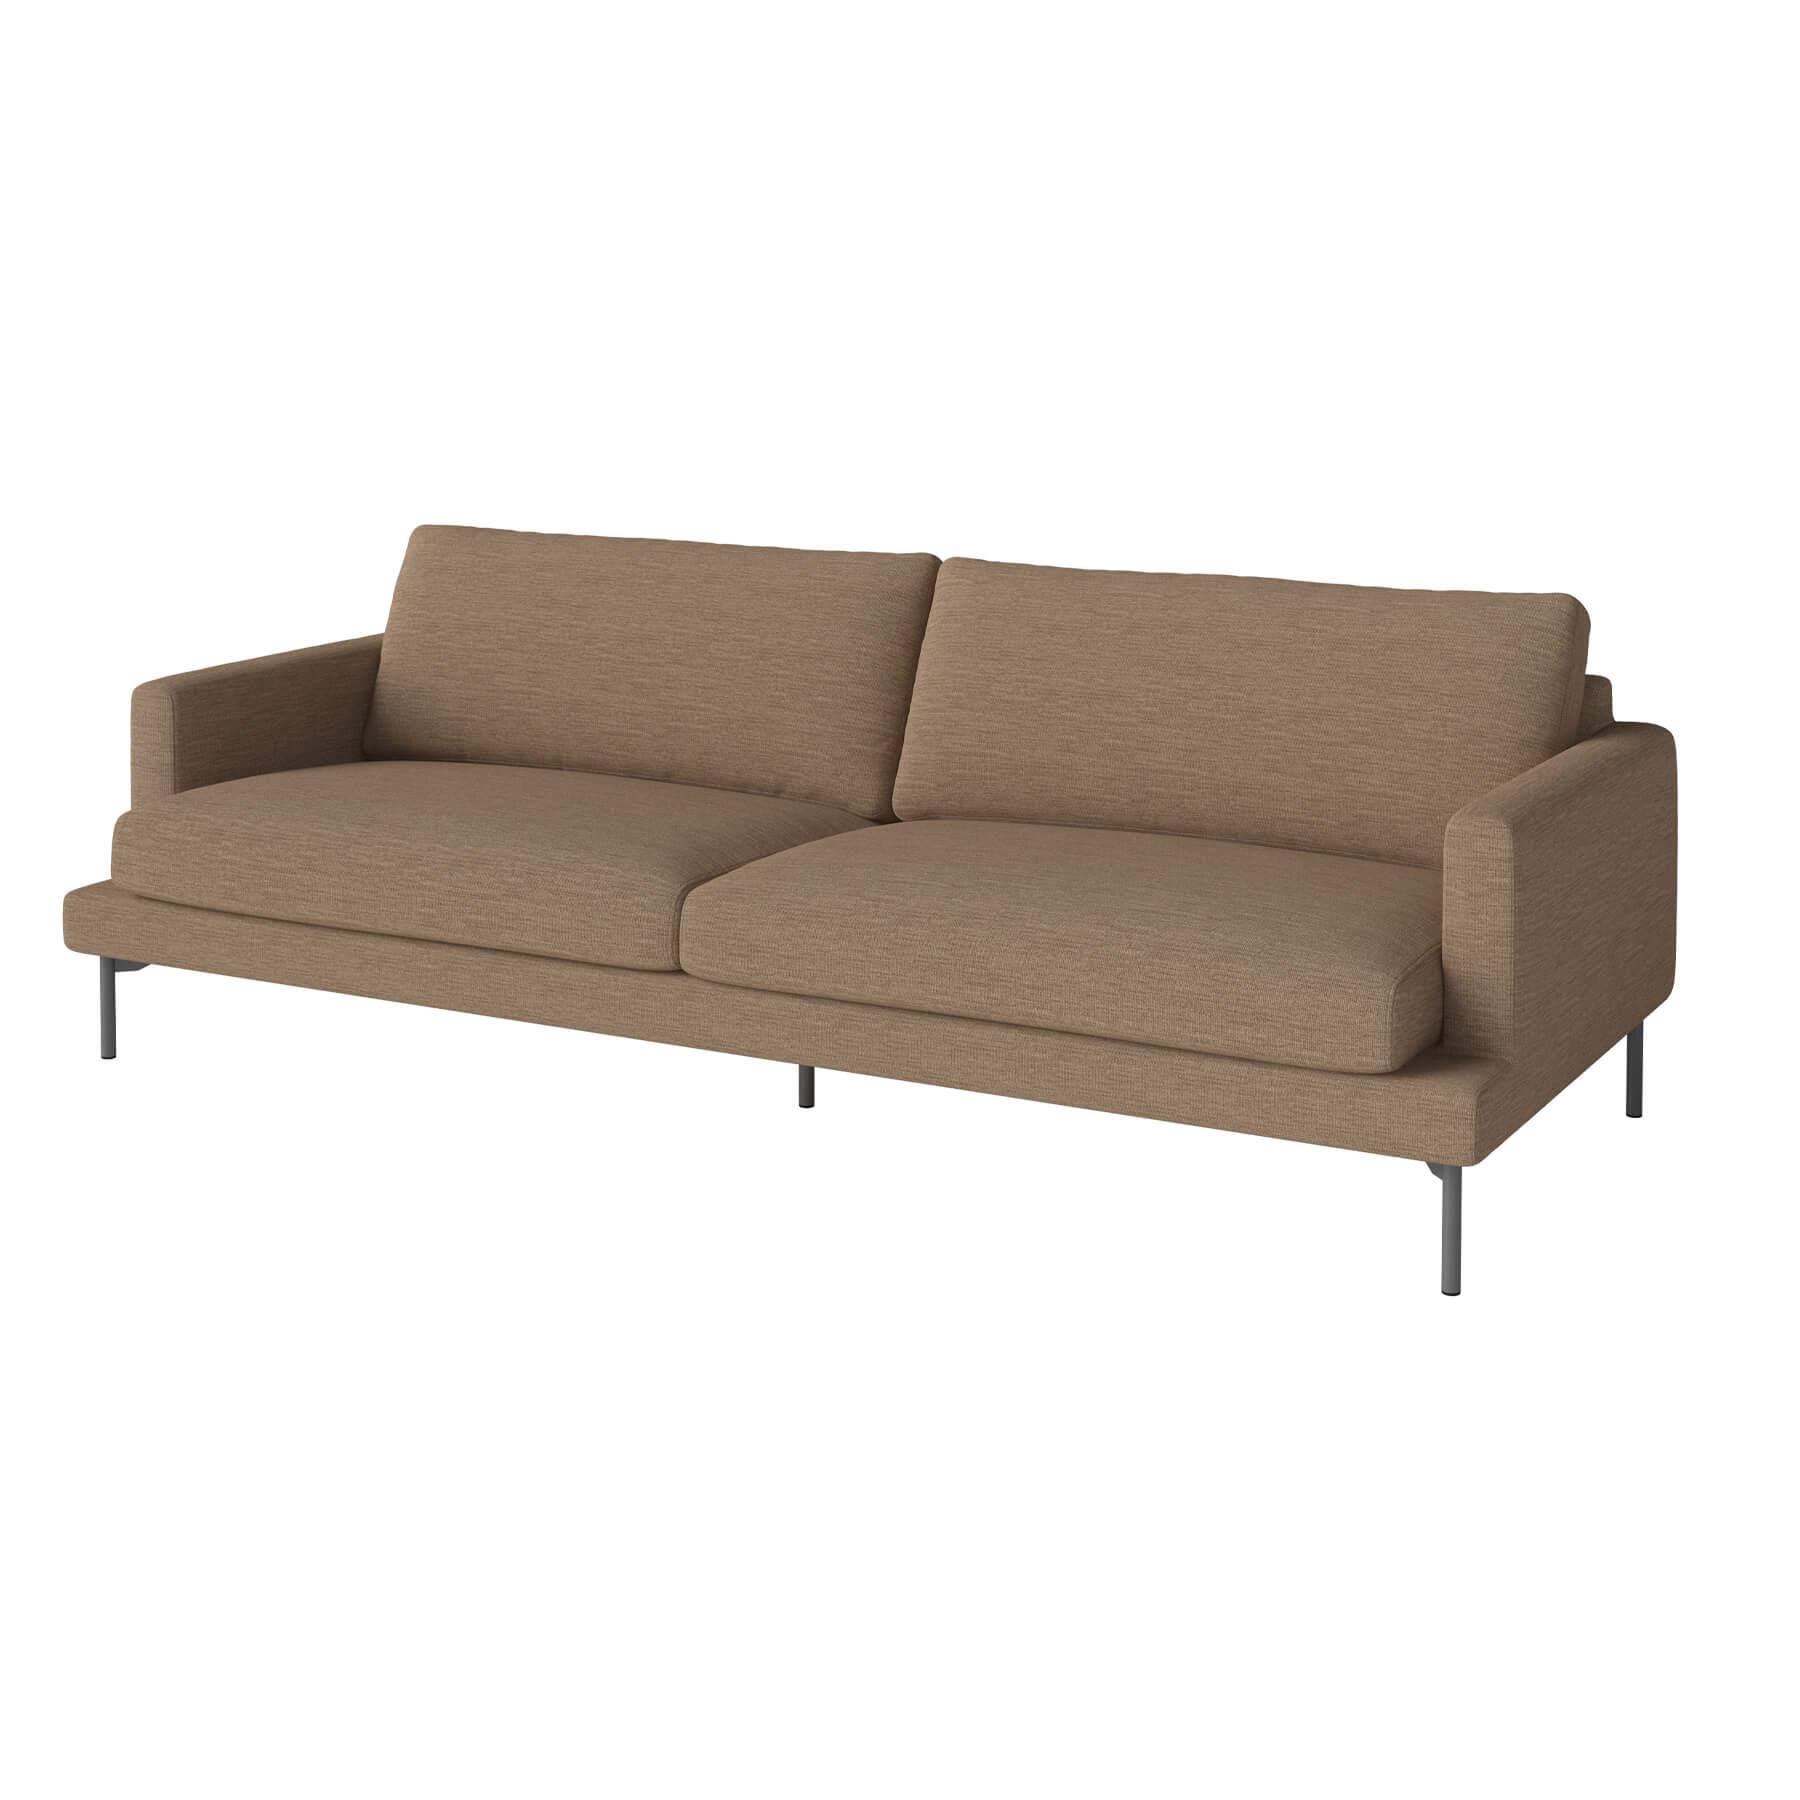 Bolia Veneda Sofa 3 Seater Sofa Grey Laquered Steel Qual Curry Brown Designer Furniture From Holloways Of Ludlow